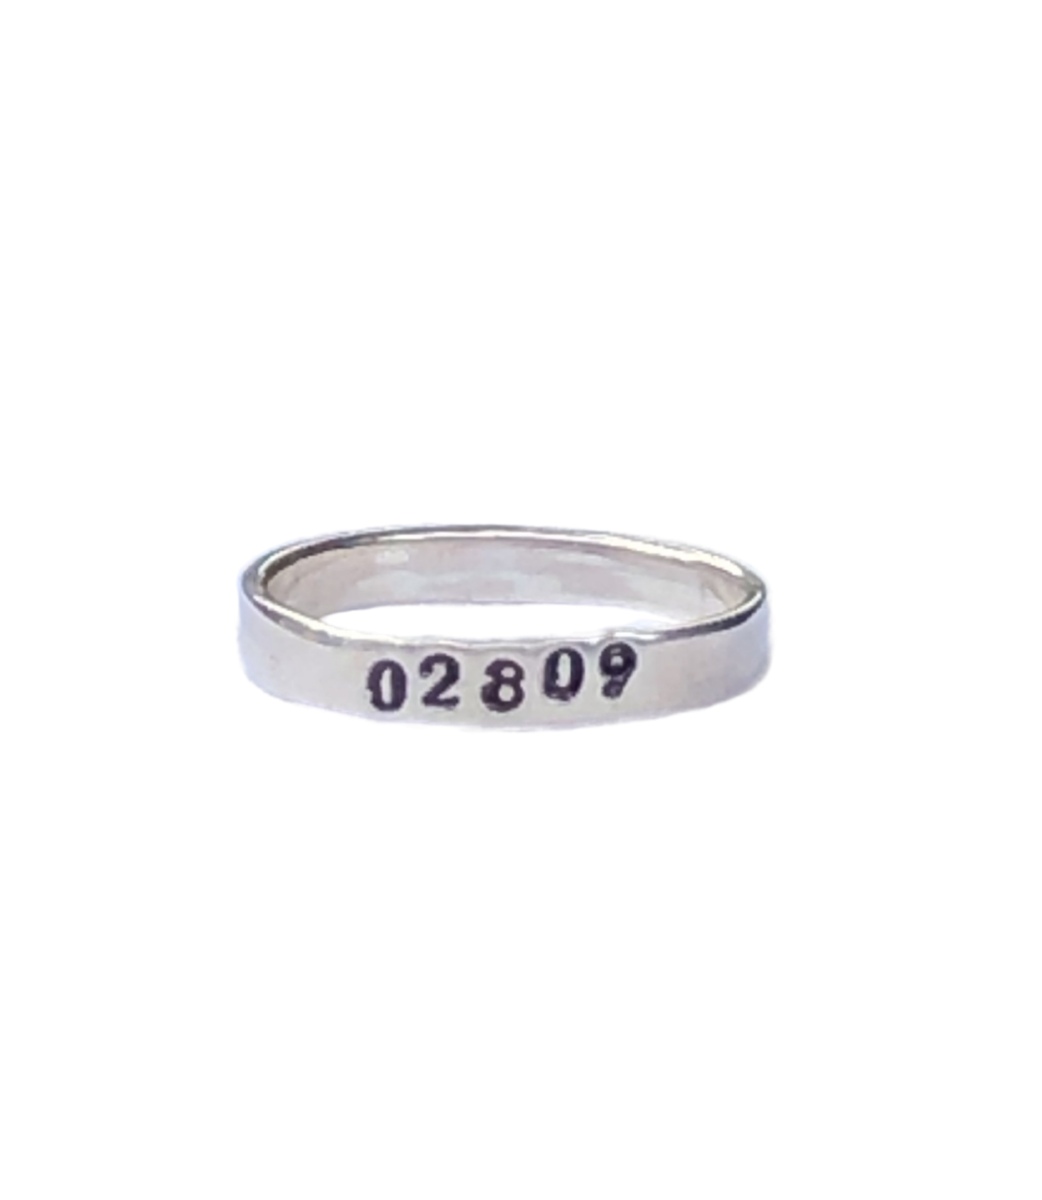 Bristol Zip Code "02809" Ring *AVAILABLE IN STORE ONLY*